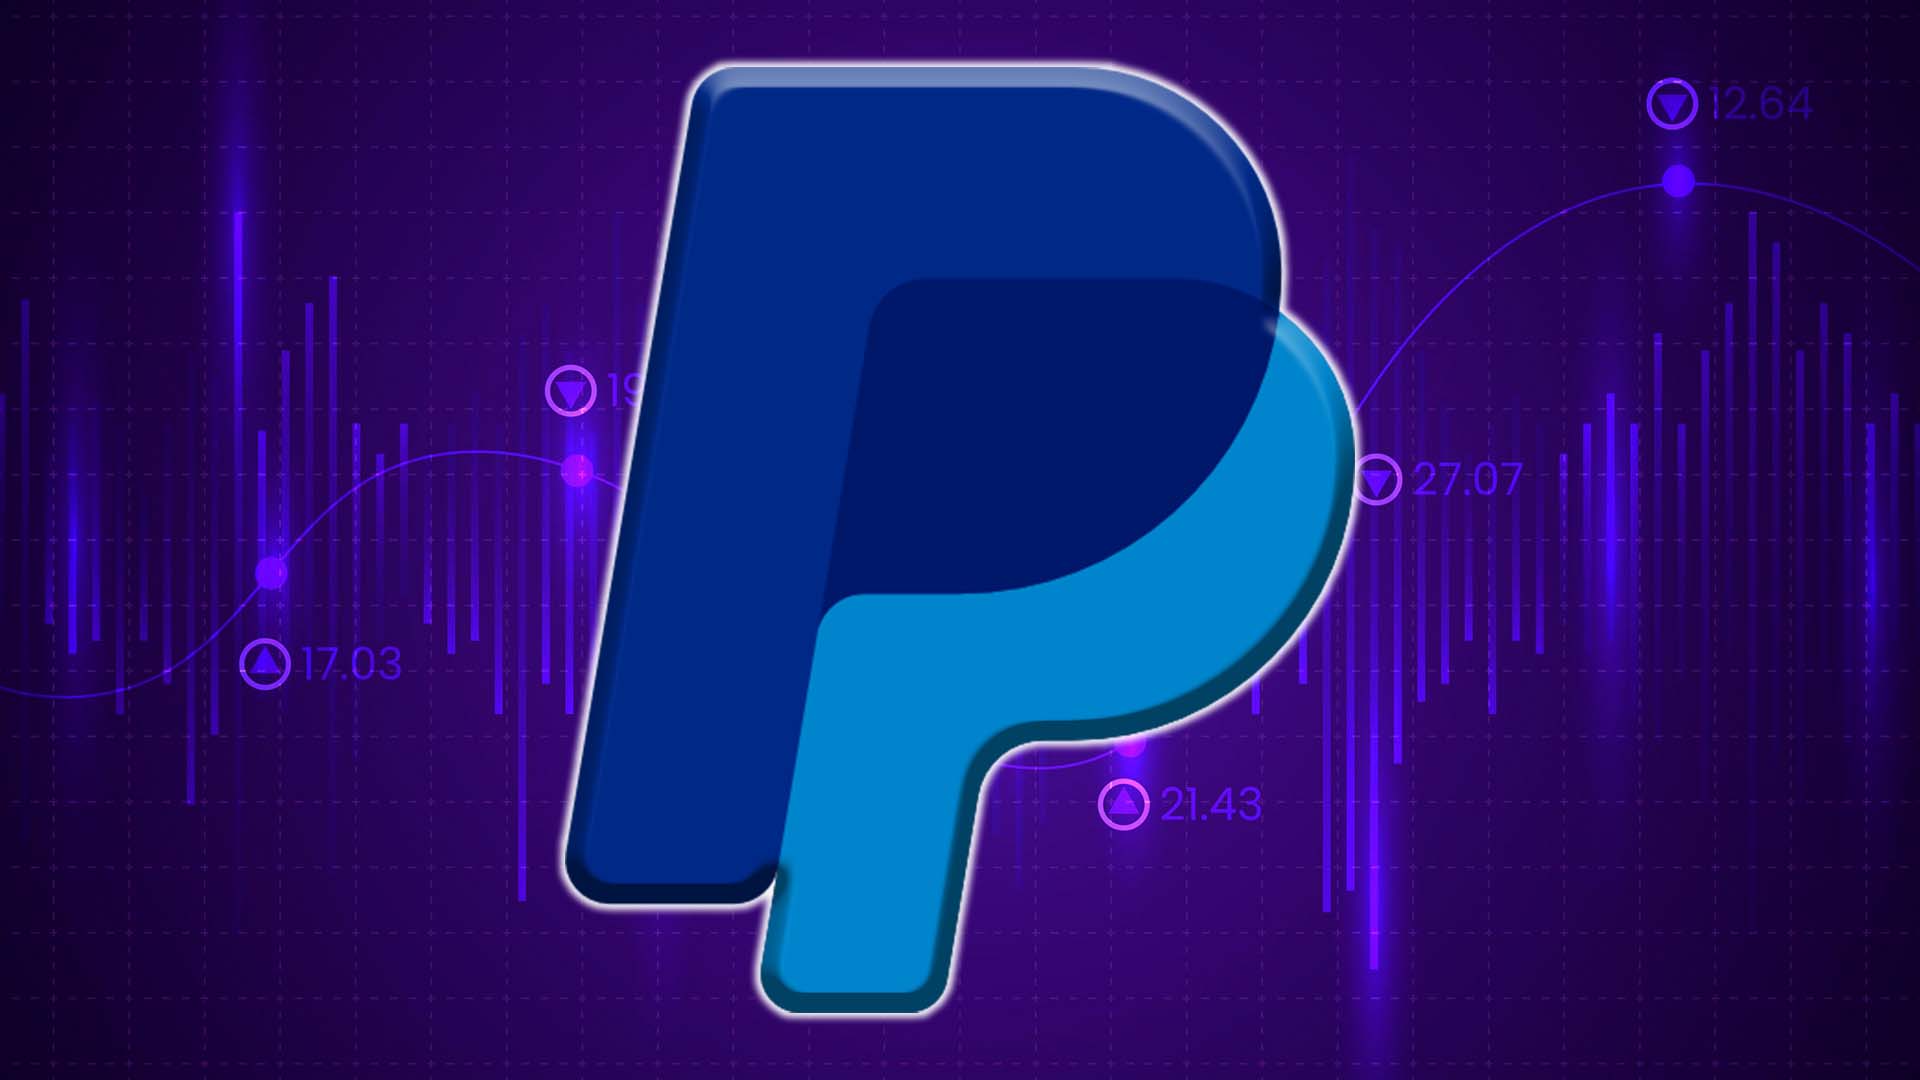 Buyers on Move over PayPal Holdings, Inc: Paypal Stock Price (NASDAQ: PYPL) Surge by 8%?